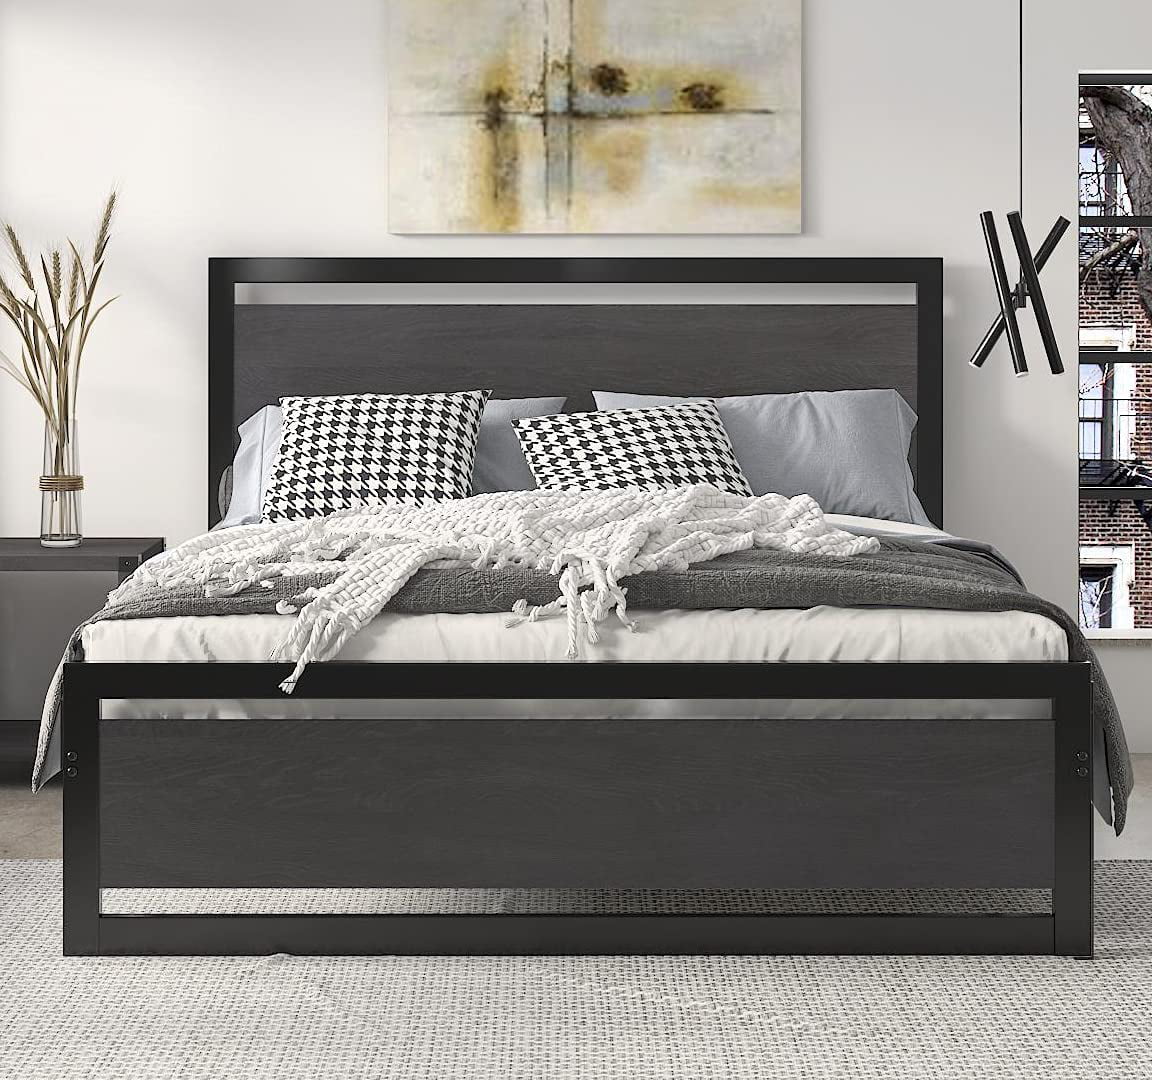 Platform Metal Bed Frame With Footboard, Double Bed Frames With Under Storage